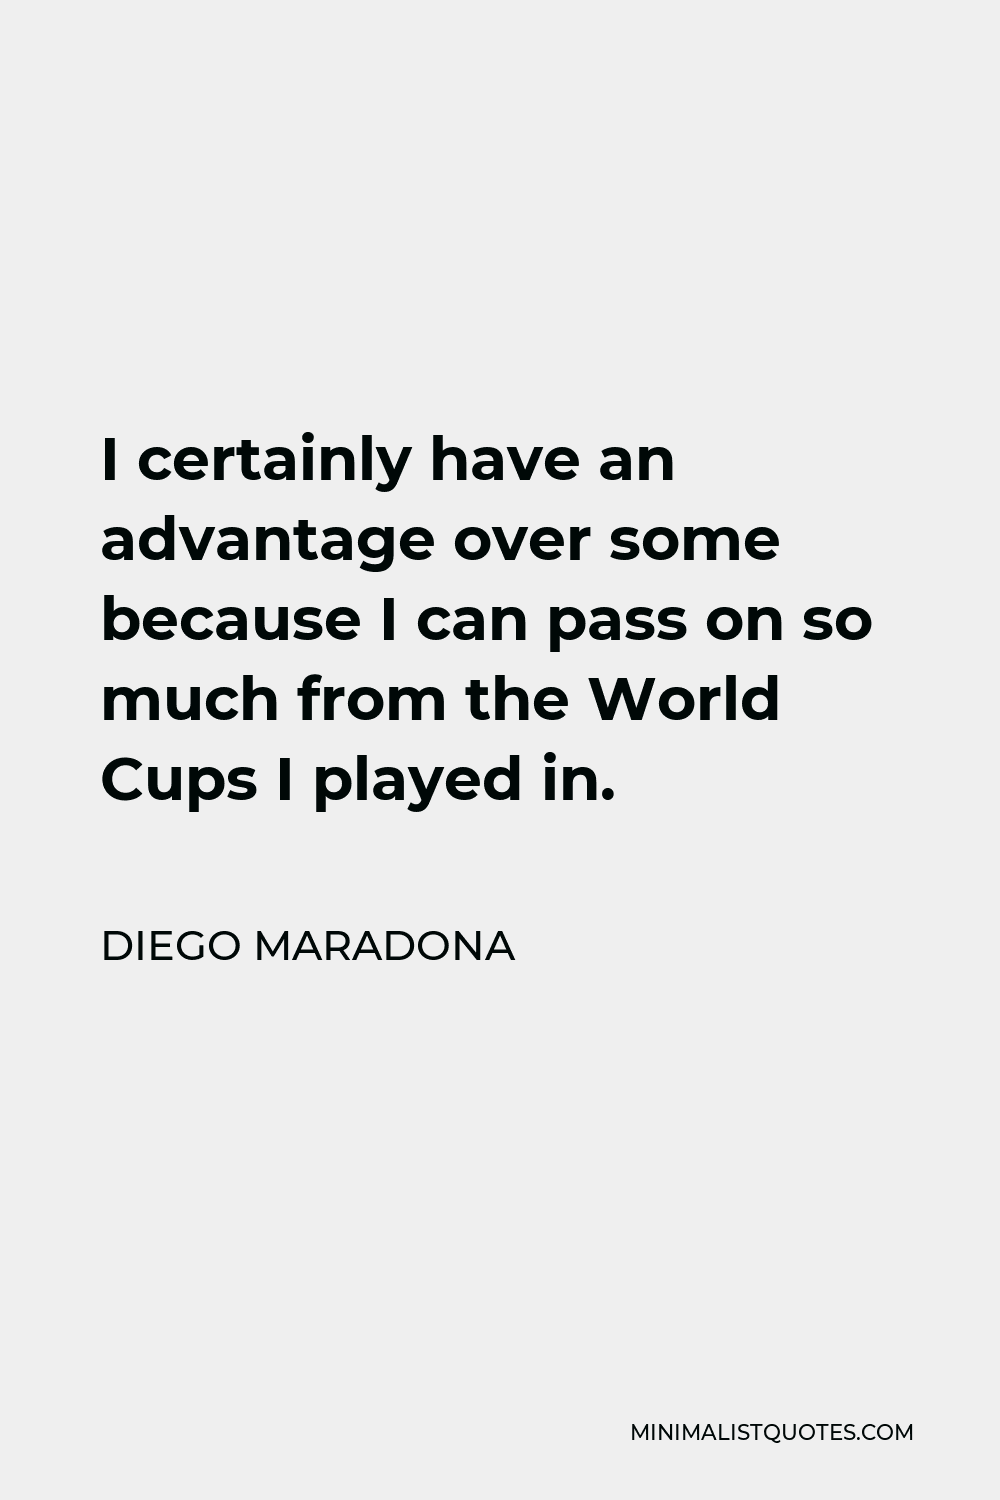 Diego Maradona Quote - I certainly have an advantage over some because I can pass on so much from the World Cups I played in.